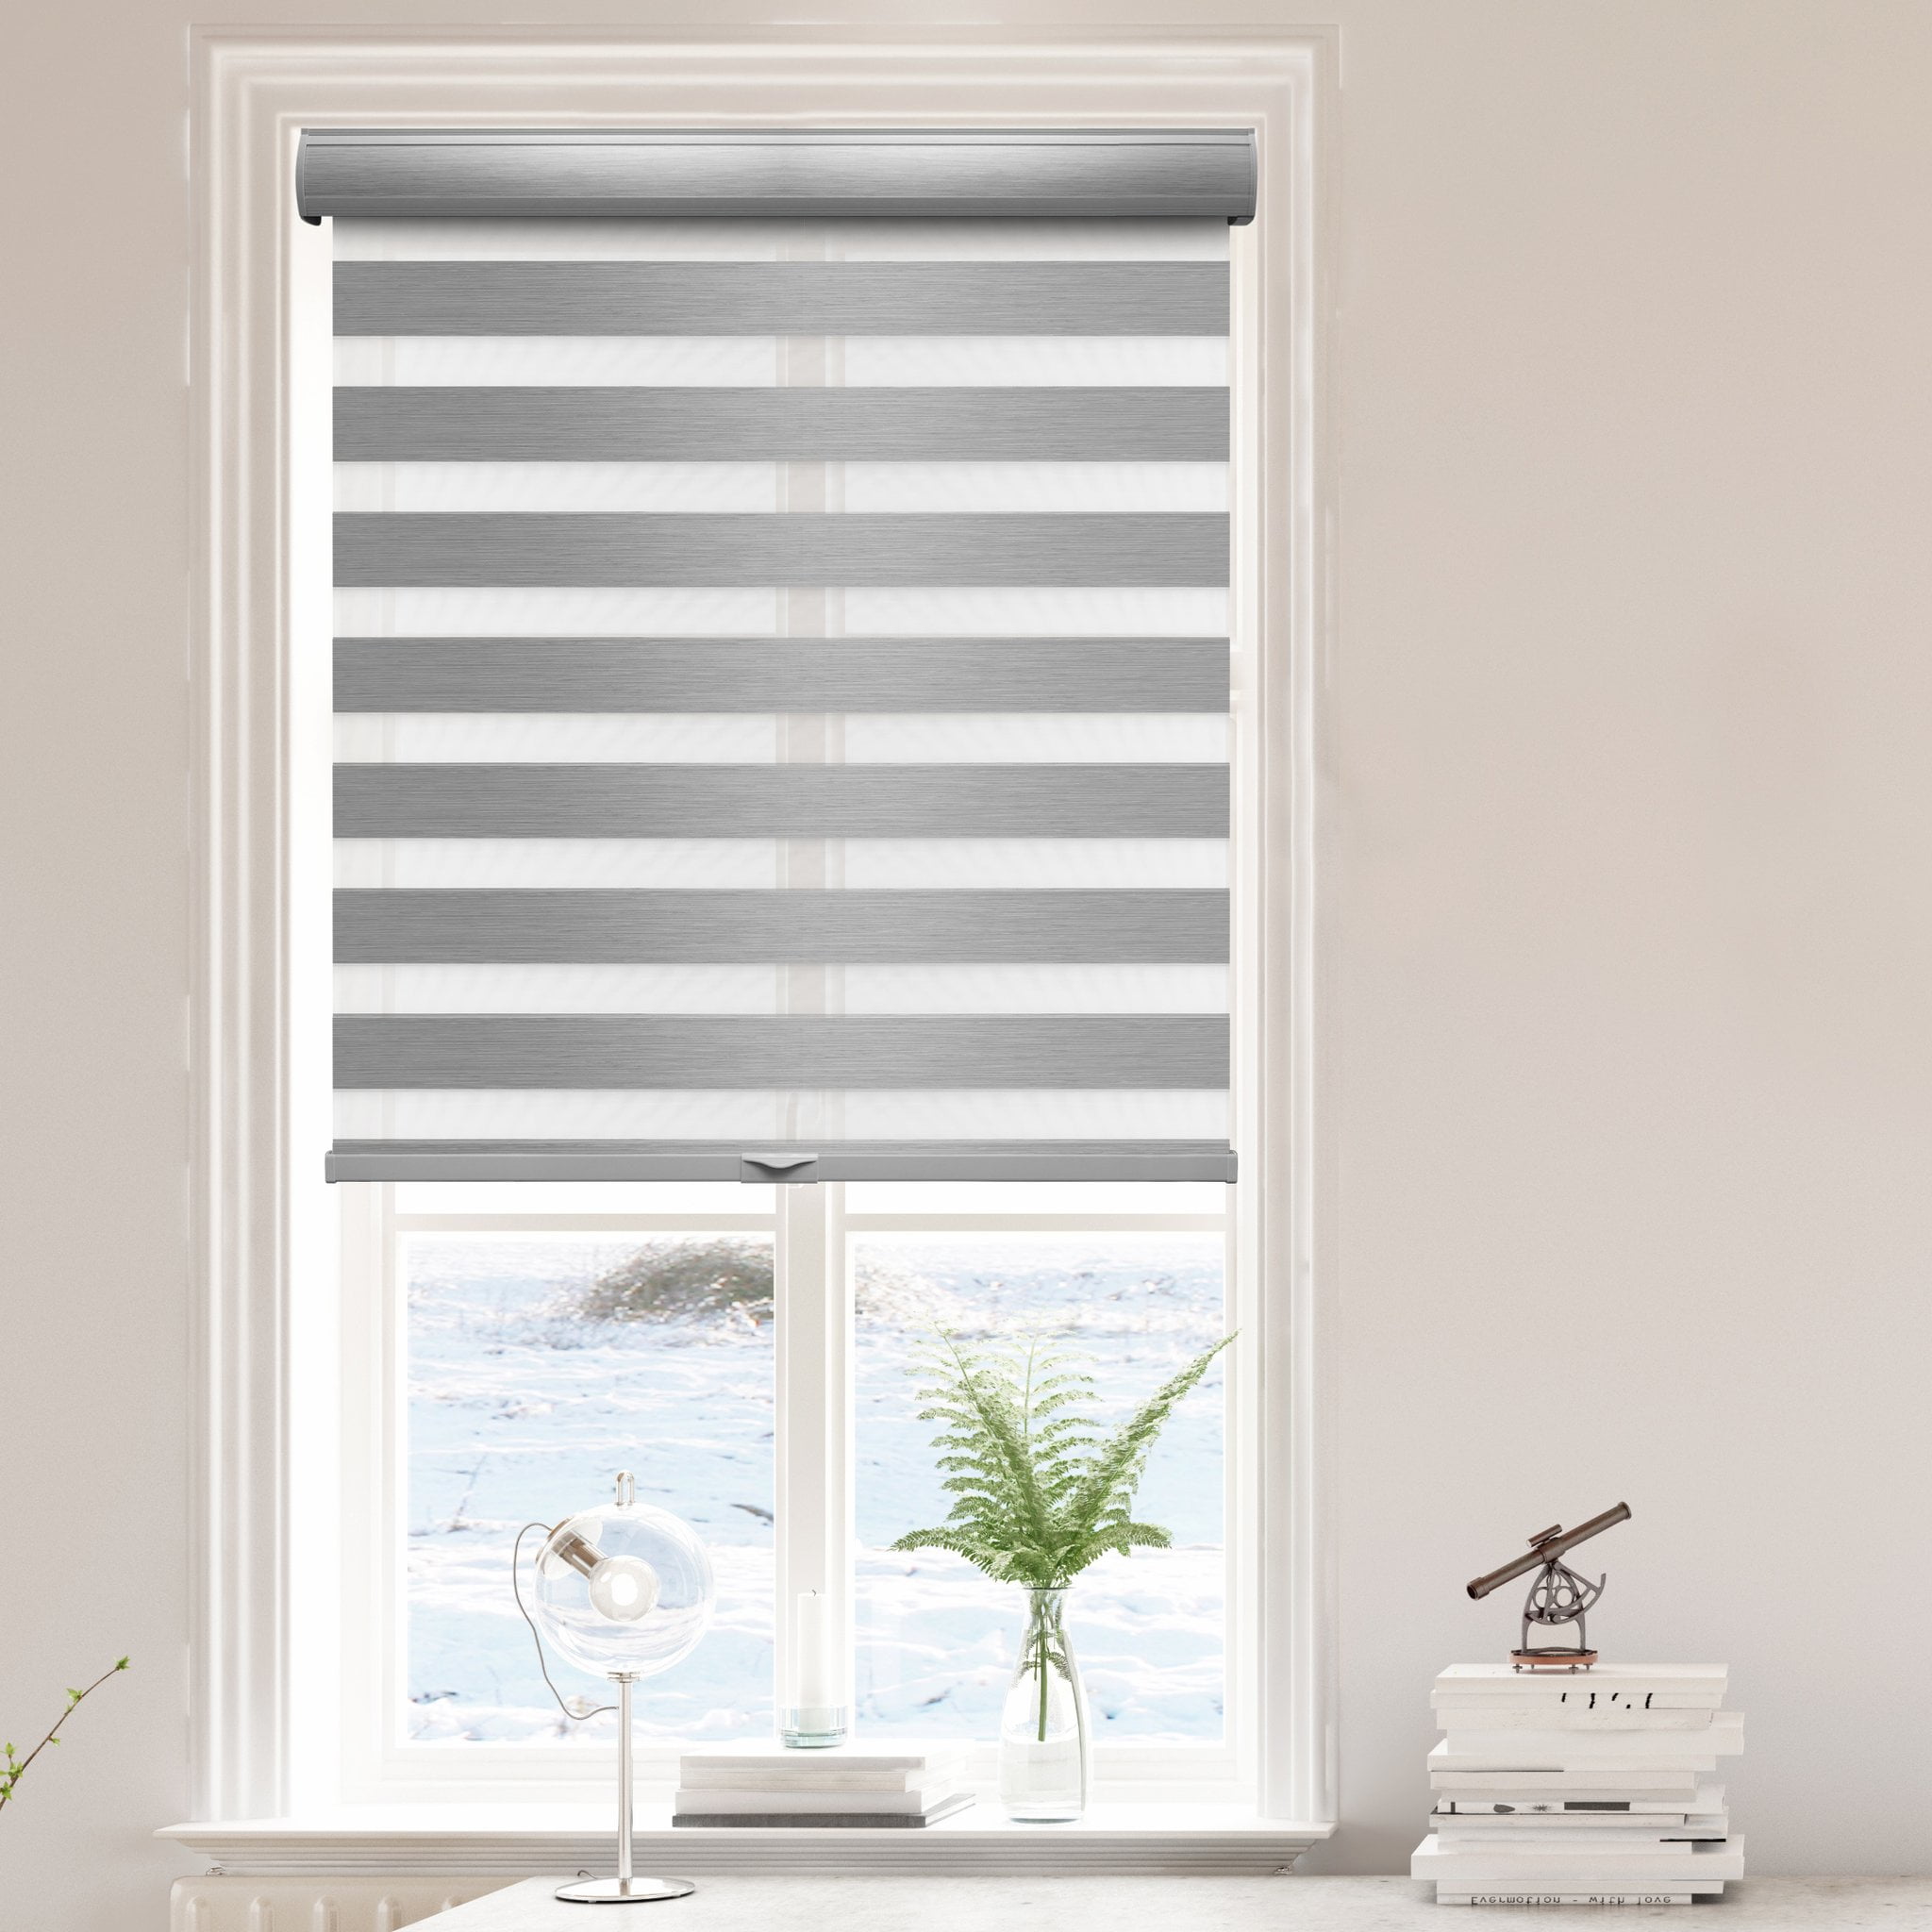 Zebra Blind Day and Night Vision Window Roller Striped Blinds Screen Grey Sizes 